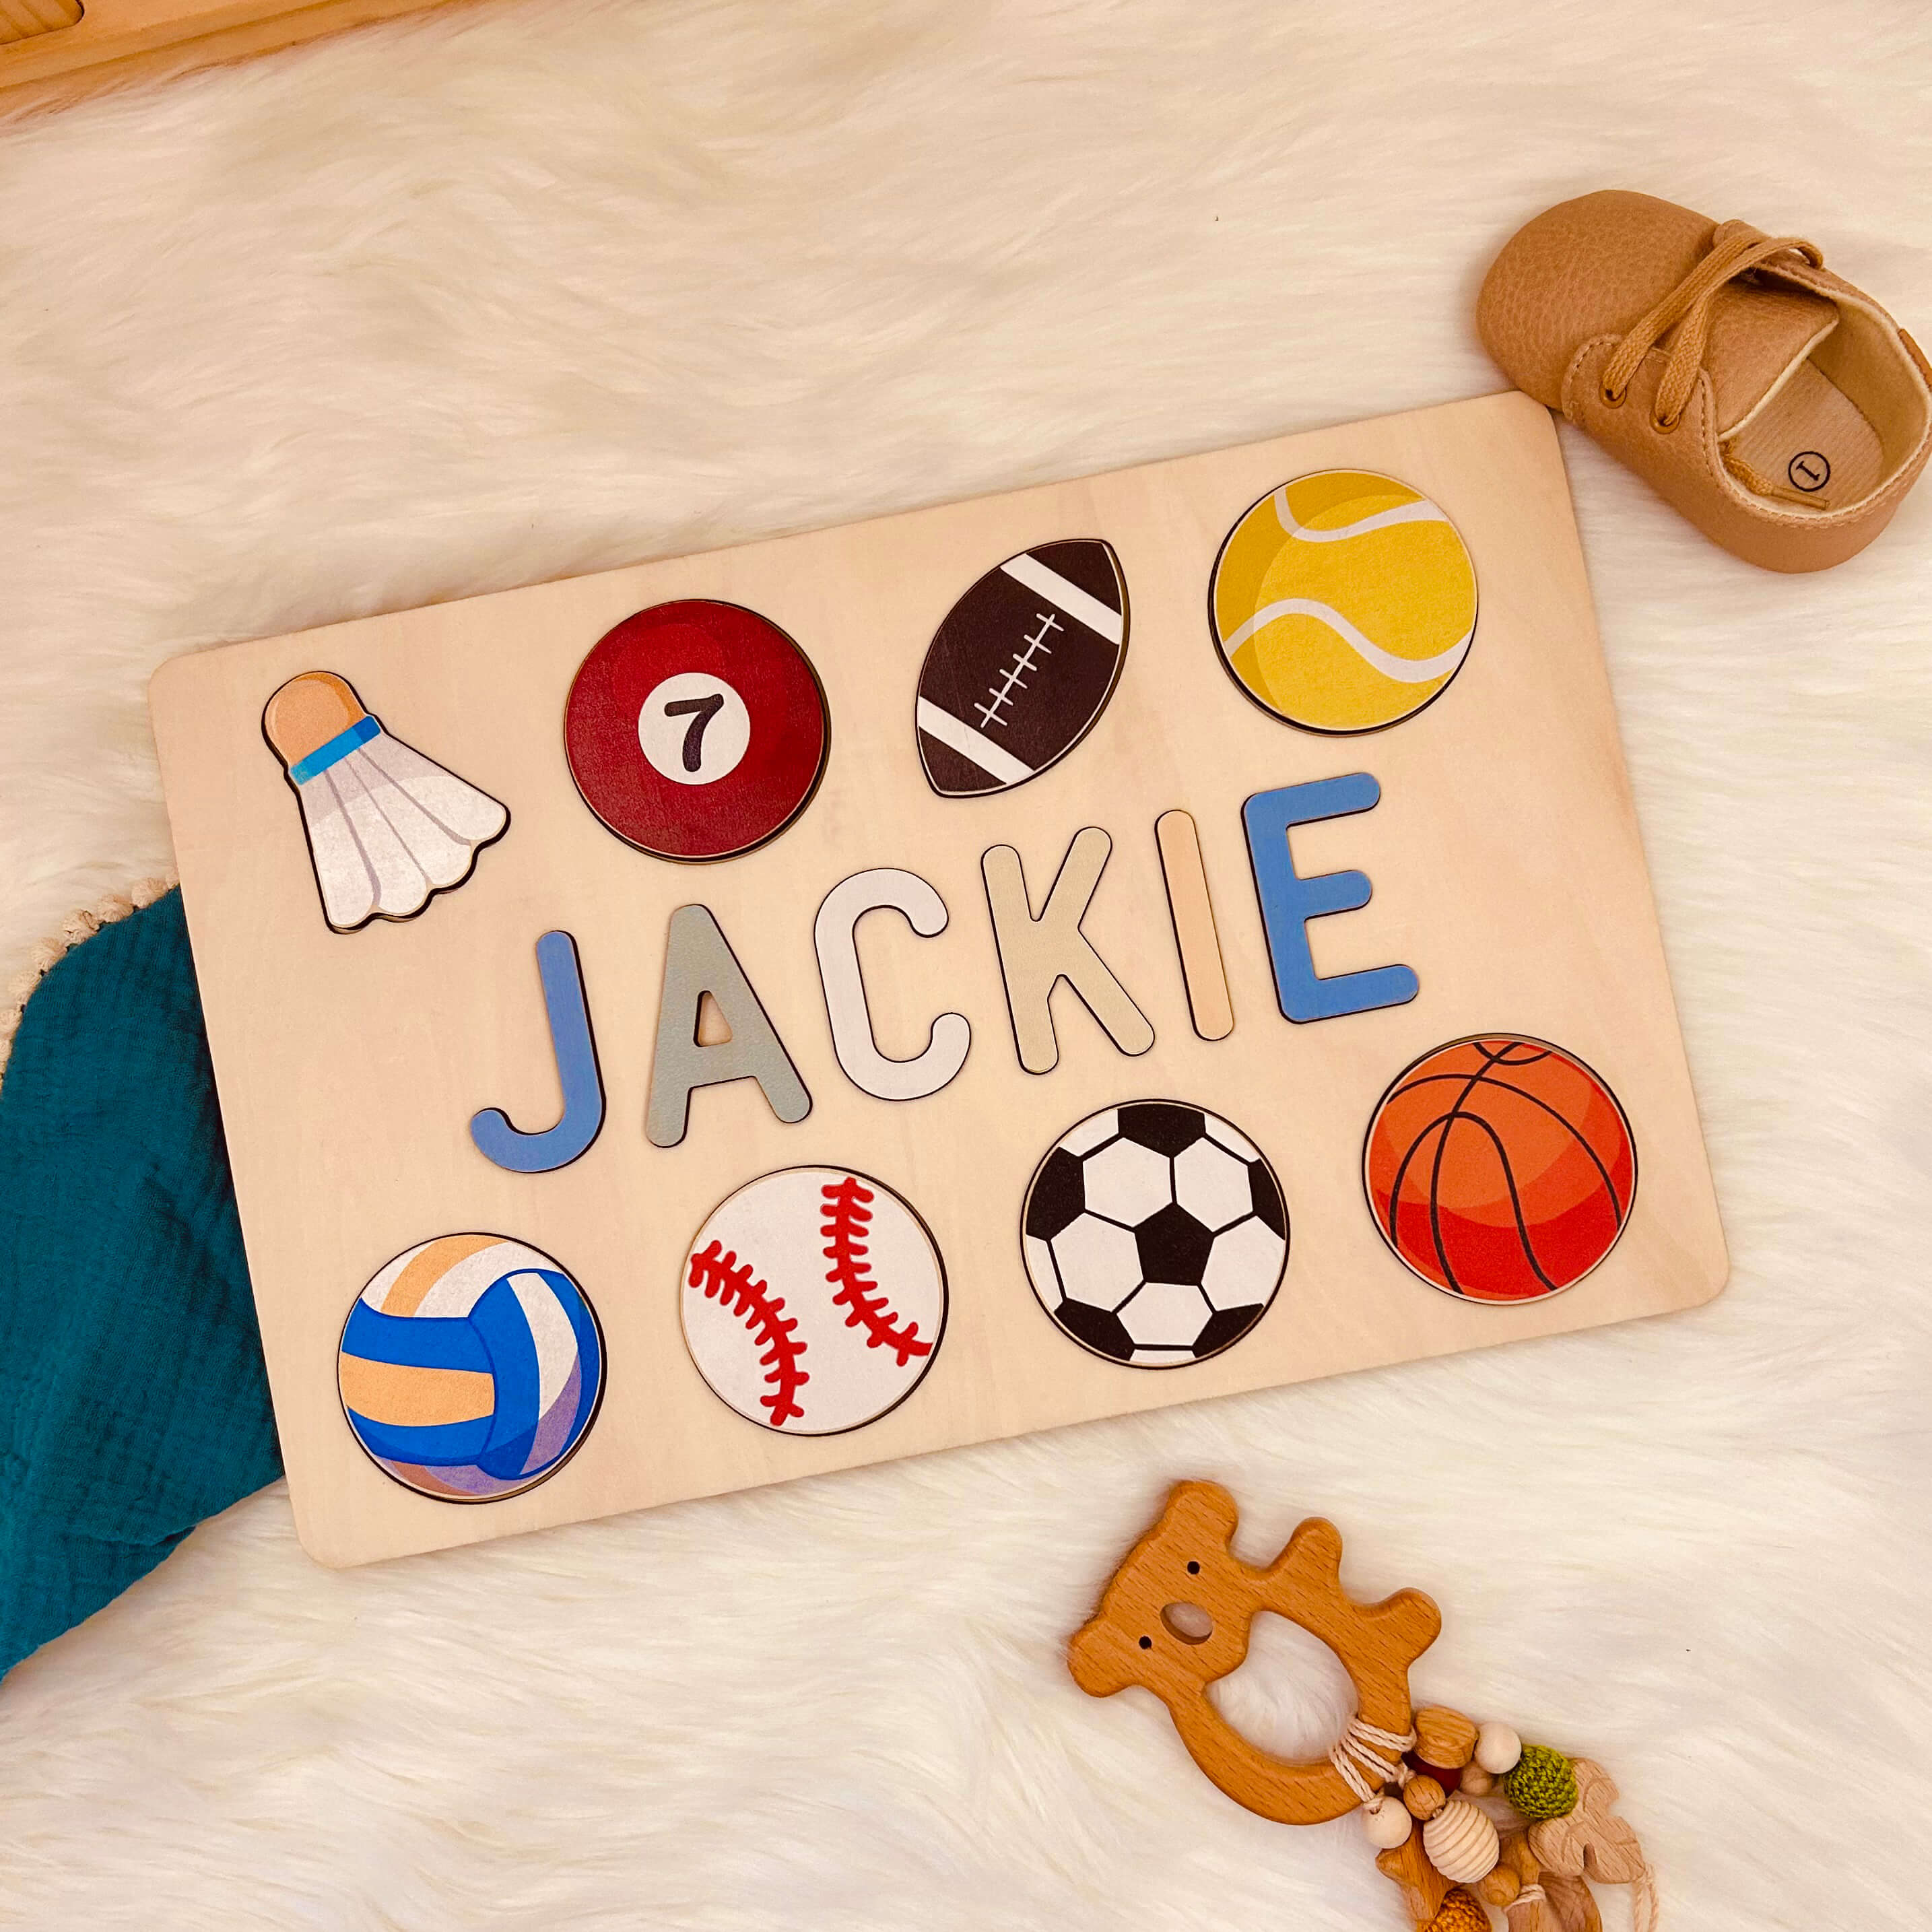 Personalized Wooden Baby Name Puzzle with Balls Product Name: Personalized Wooden Baby Name Puzzle with Balls Material: Eco-Friendly Plywood BasswoodLetters Available: Up to 10Engraving Messages: AvailableNon-Toxic: YesNon-Harmful: Yes Color: Pastel-boy;